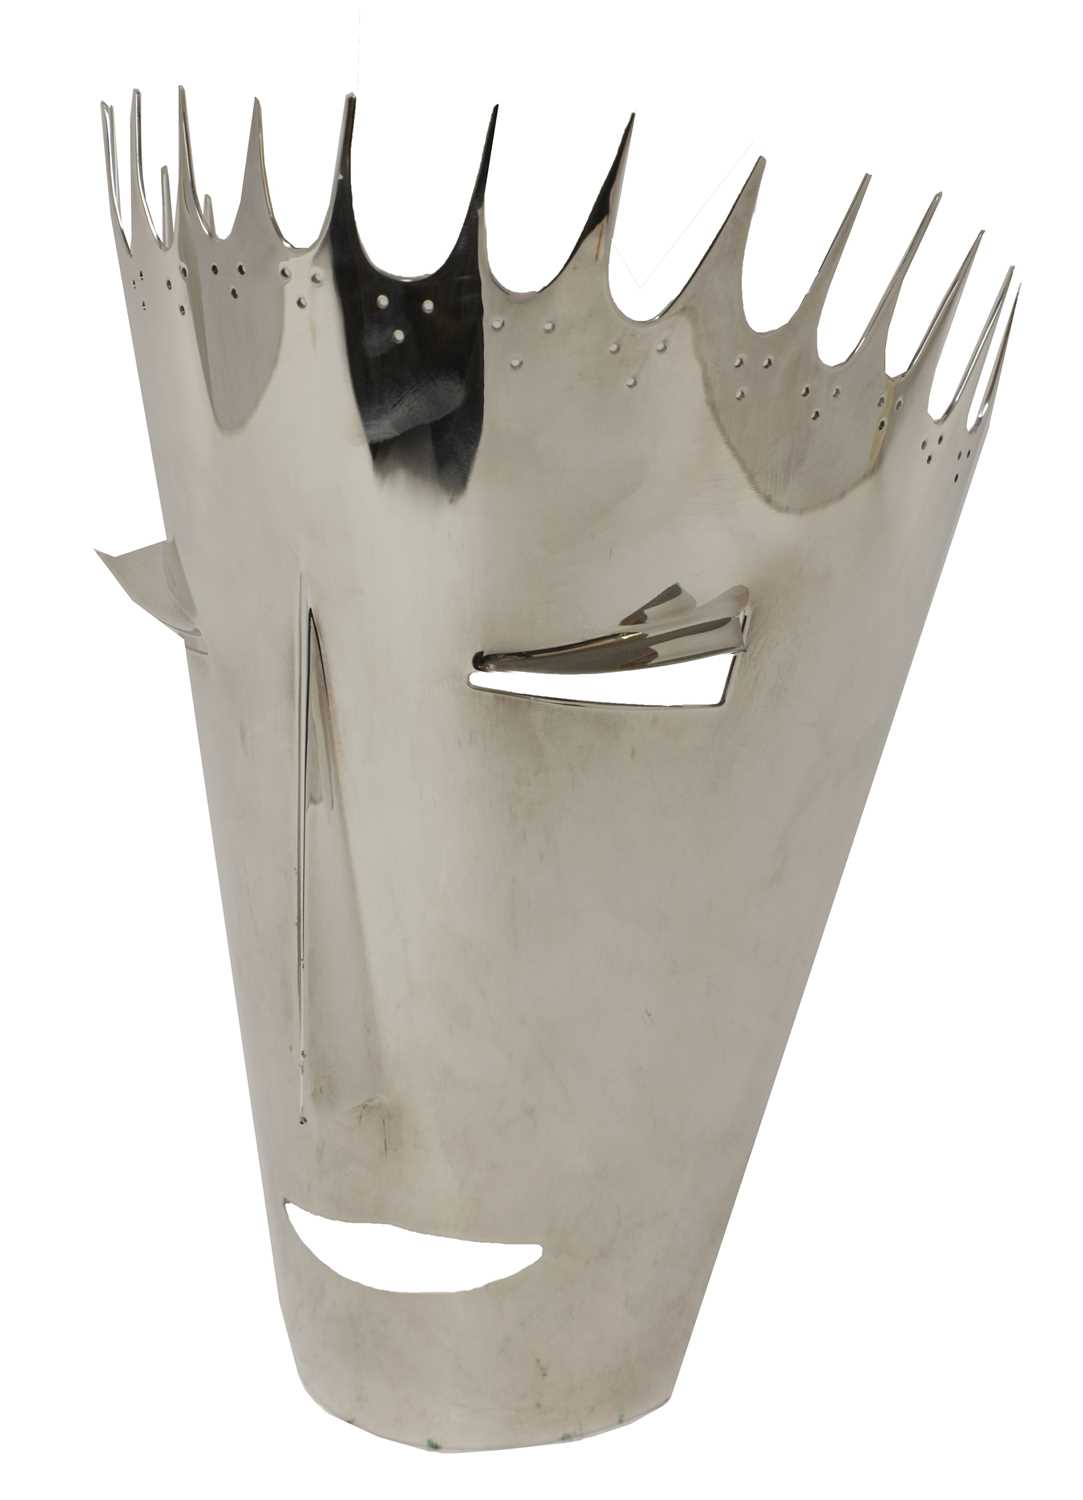 Lot 52 - A silver-plated face mask